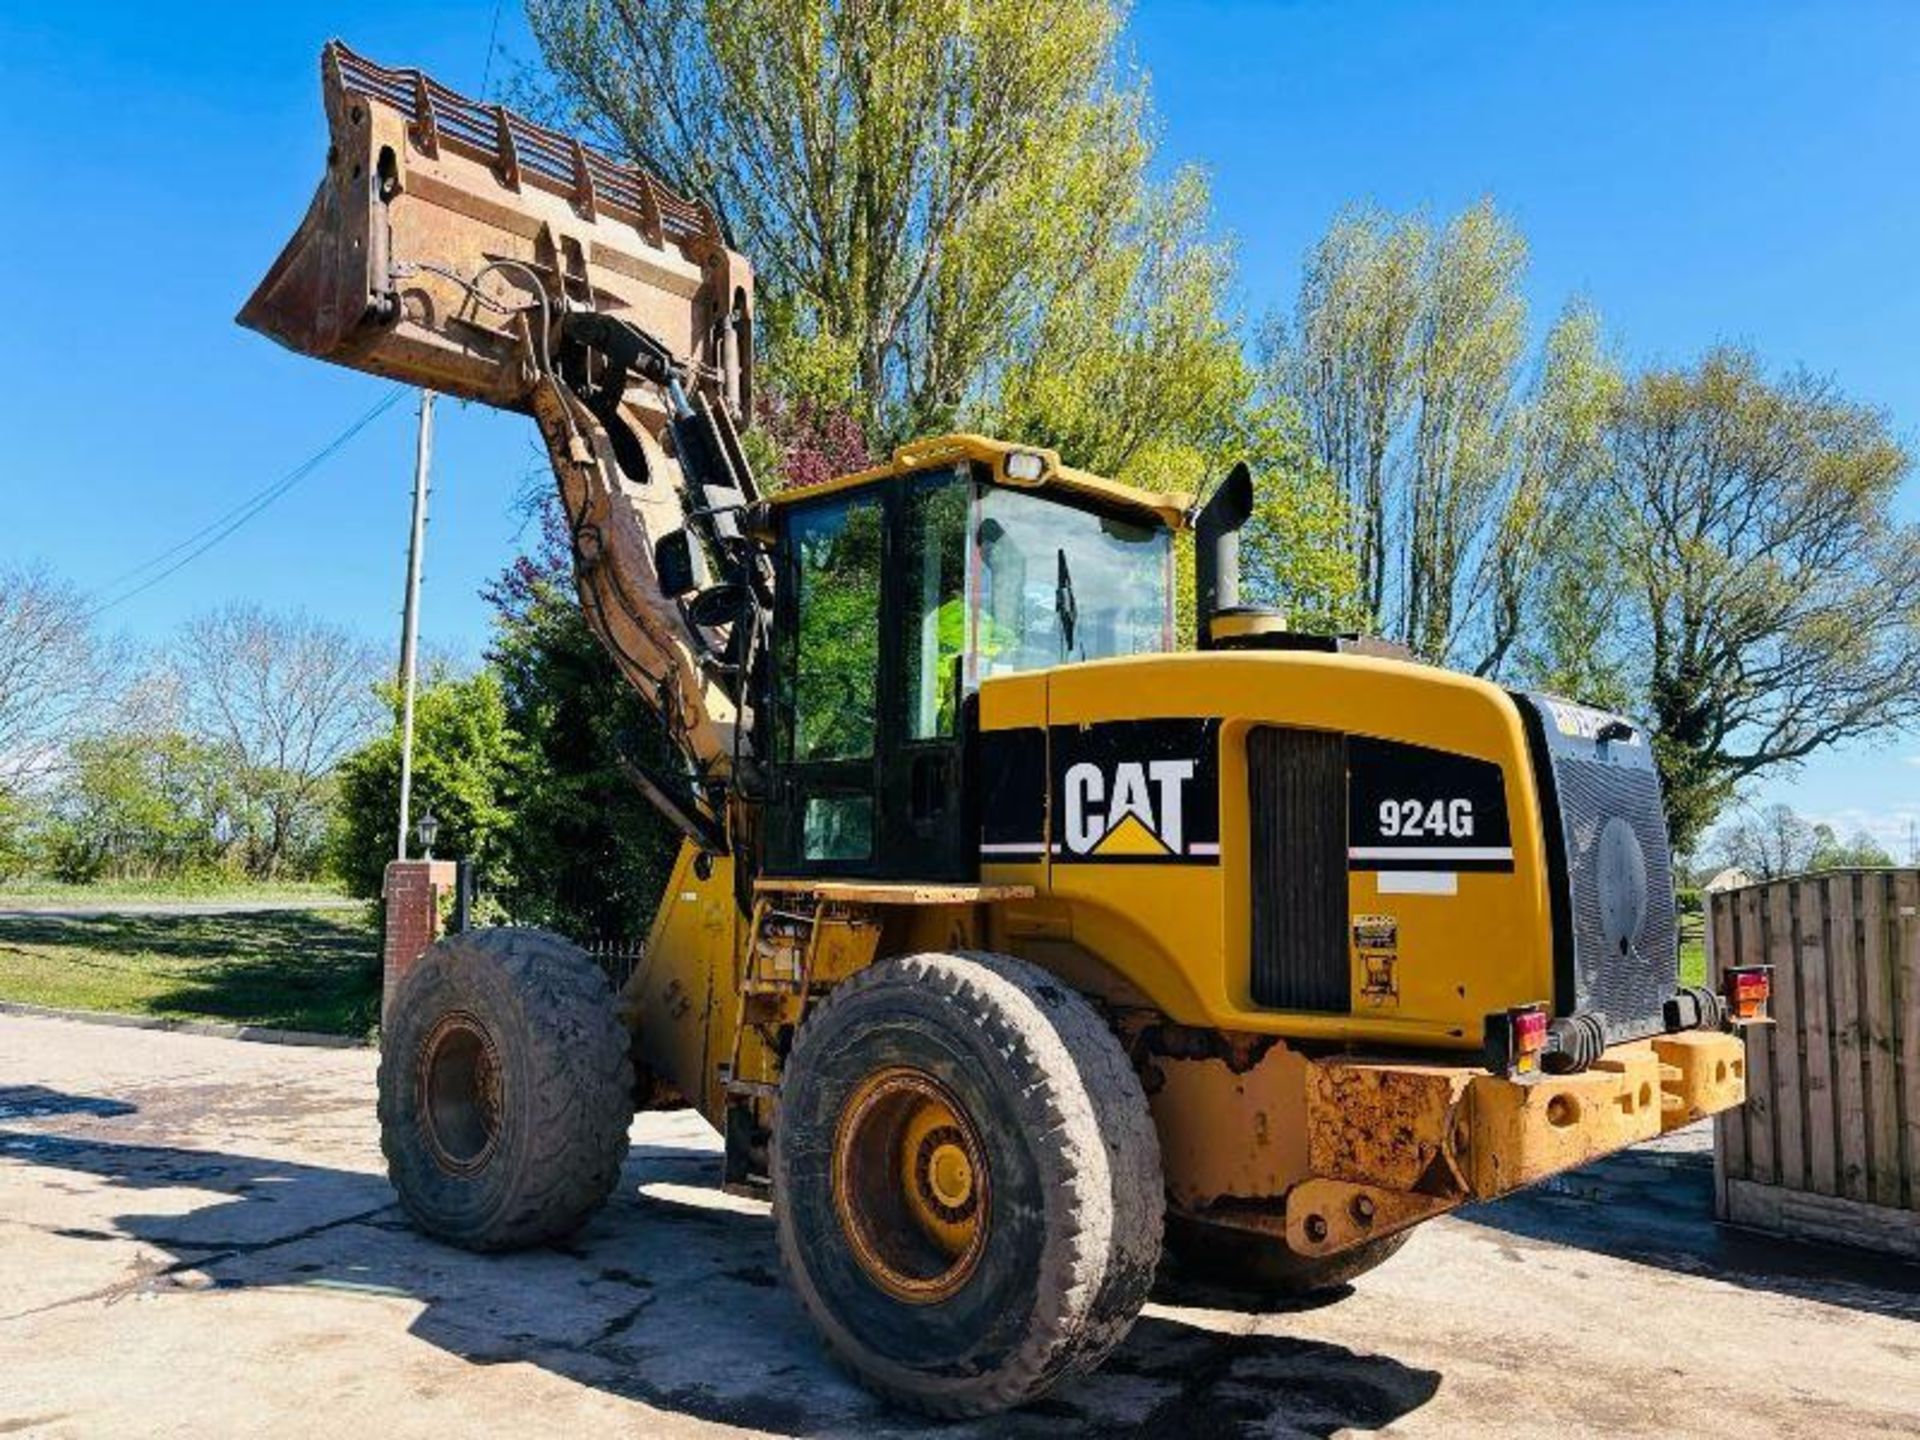 CATERPILLAR 924G 4WD LOADING SHOVEL C/W FOUR IN ONE BUCKET  - Image 6 of 18